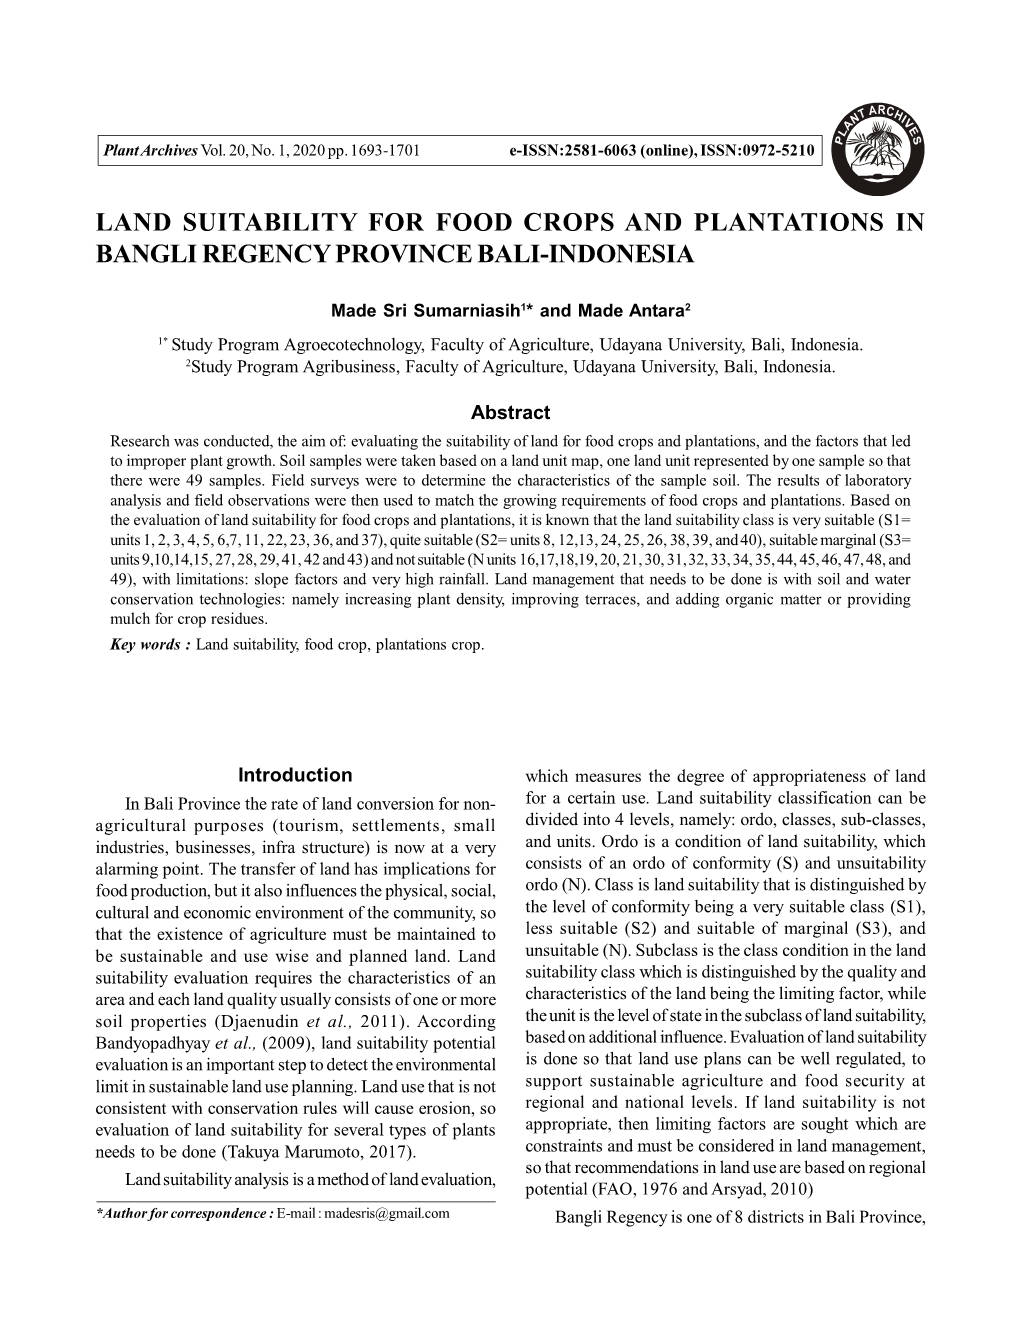 Land Suitability for Food Crops and Plantations in Bangli Regency Province Bali-Indonesia